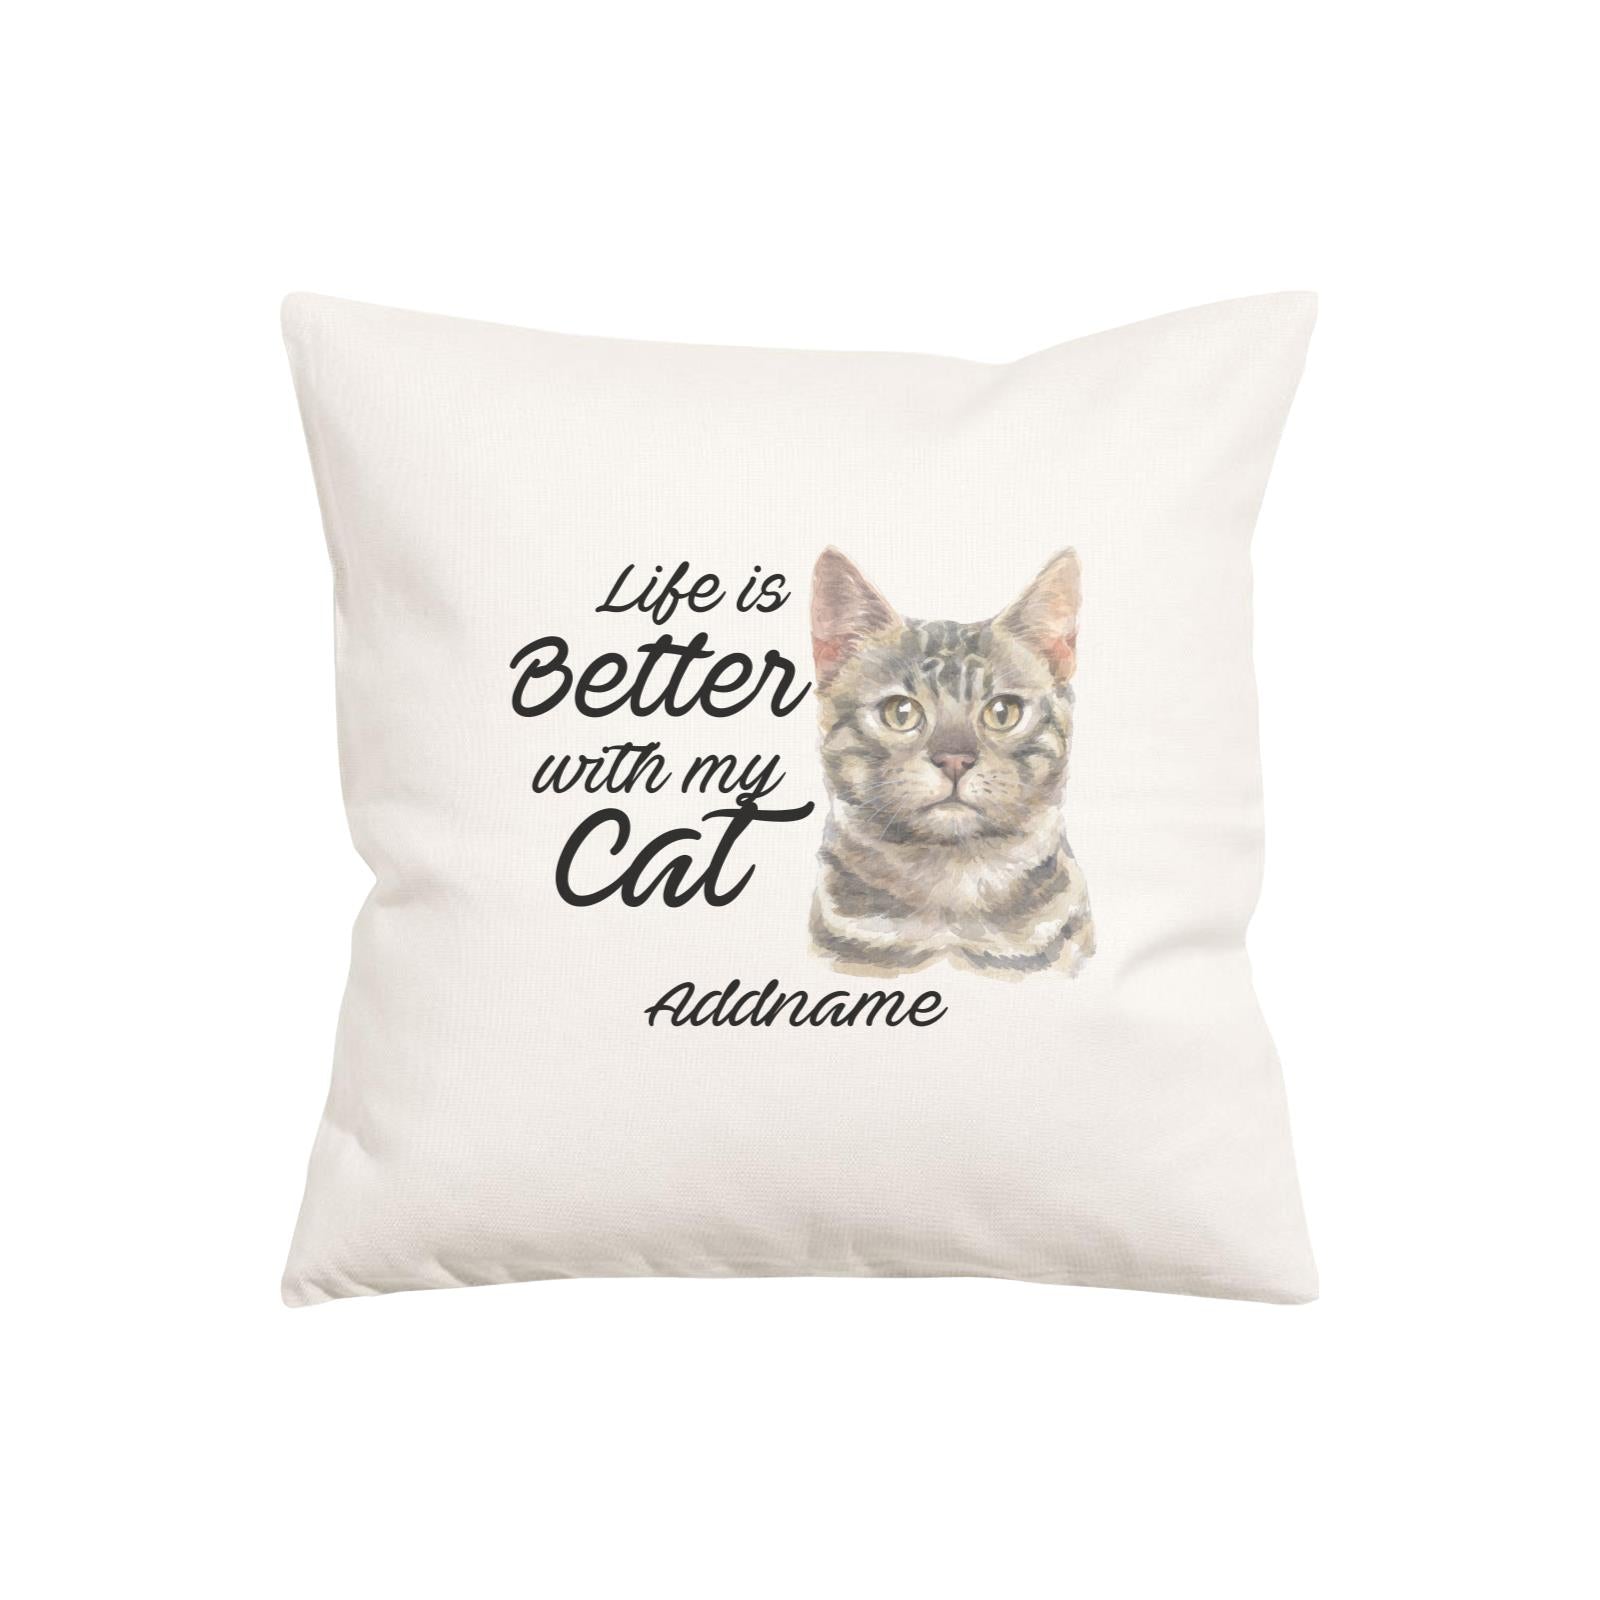 Watercolor Life is Better With My Cat Bengal Grey Addname Pillow Cushion